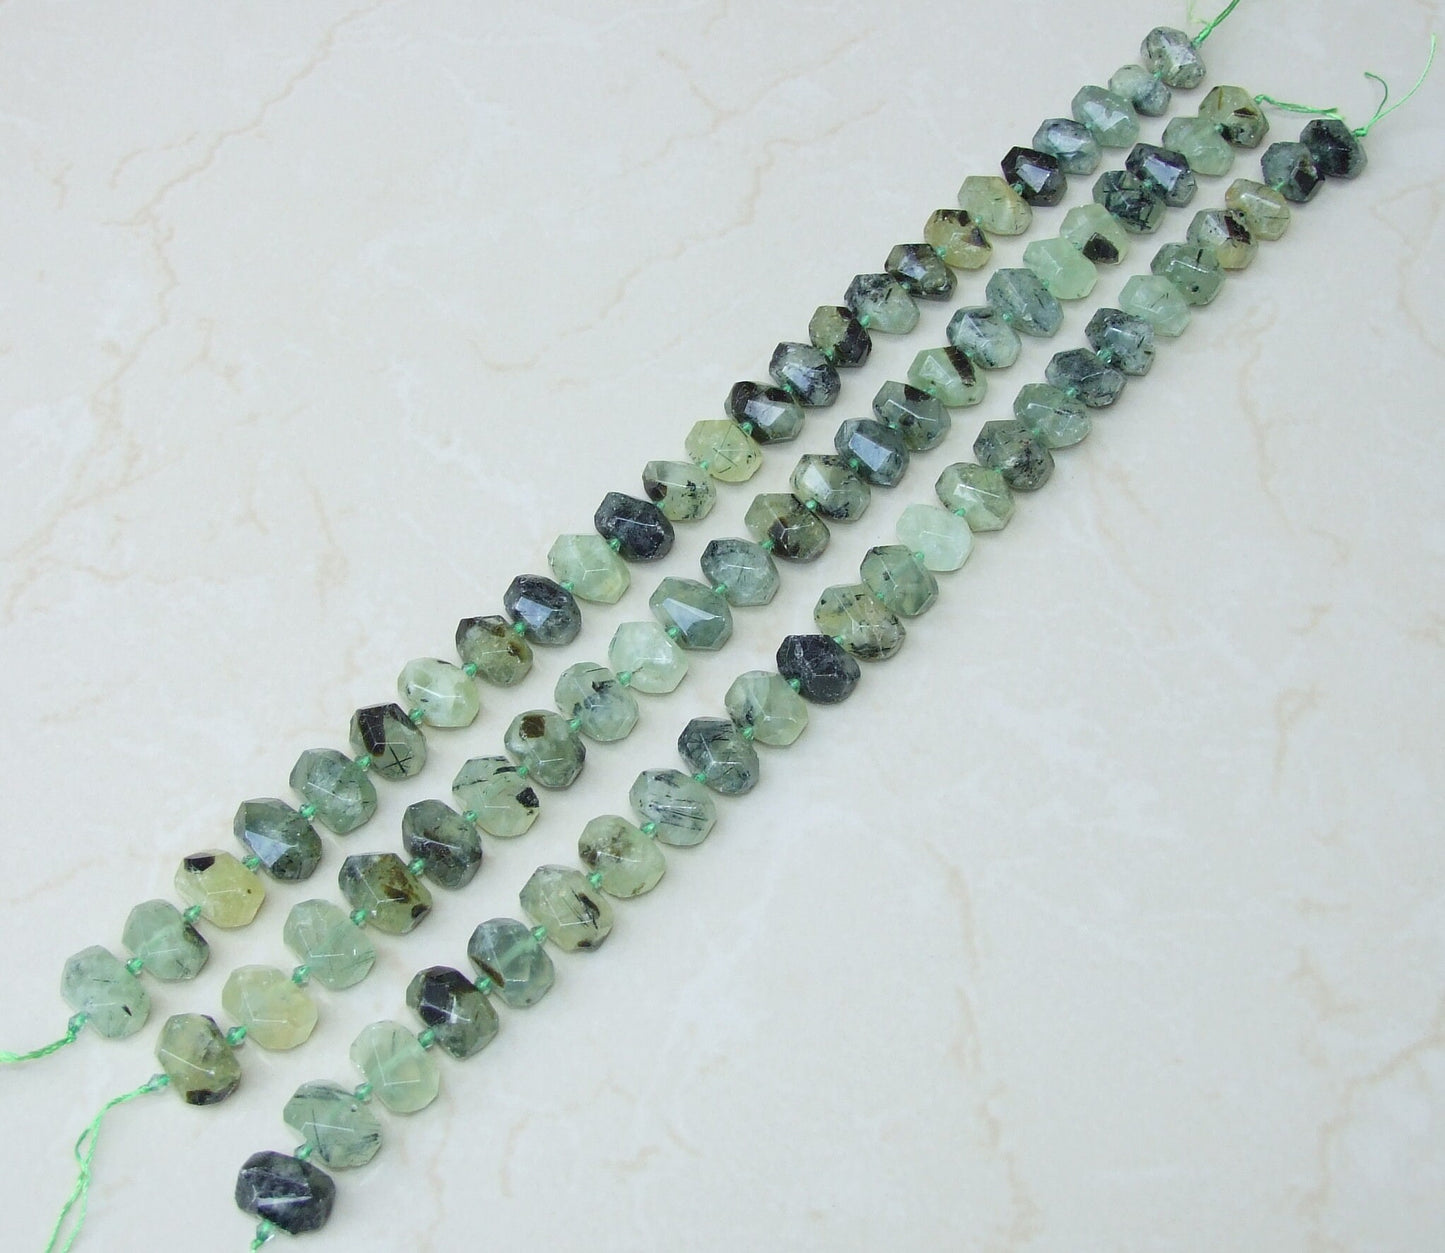 Half Strand Gemstone PREHNITE Faceted NUGGET BEADED Pendant Stress Relief Gifts, 14mm x 14mm x 20mm Jewelry Stones